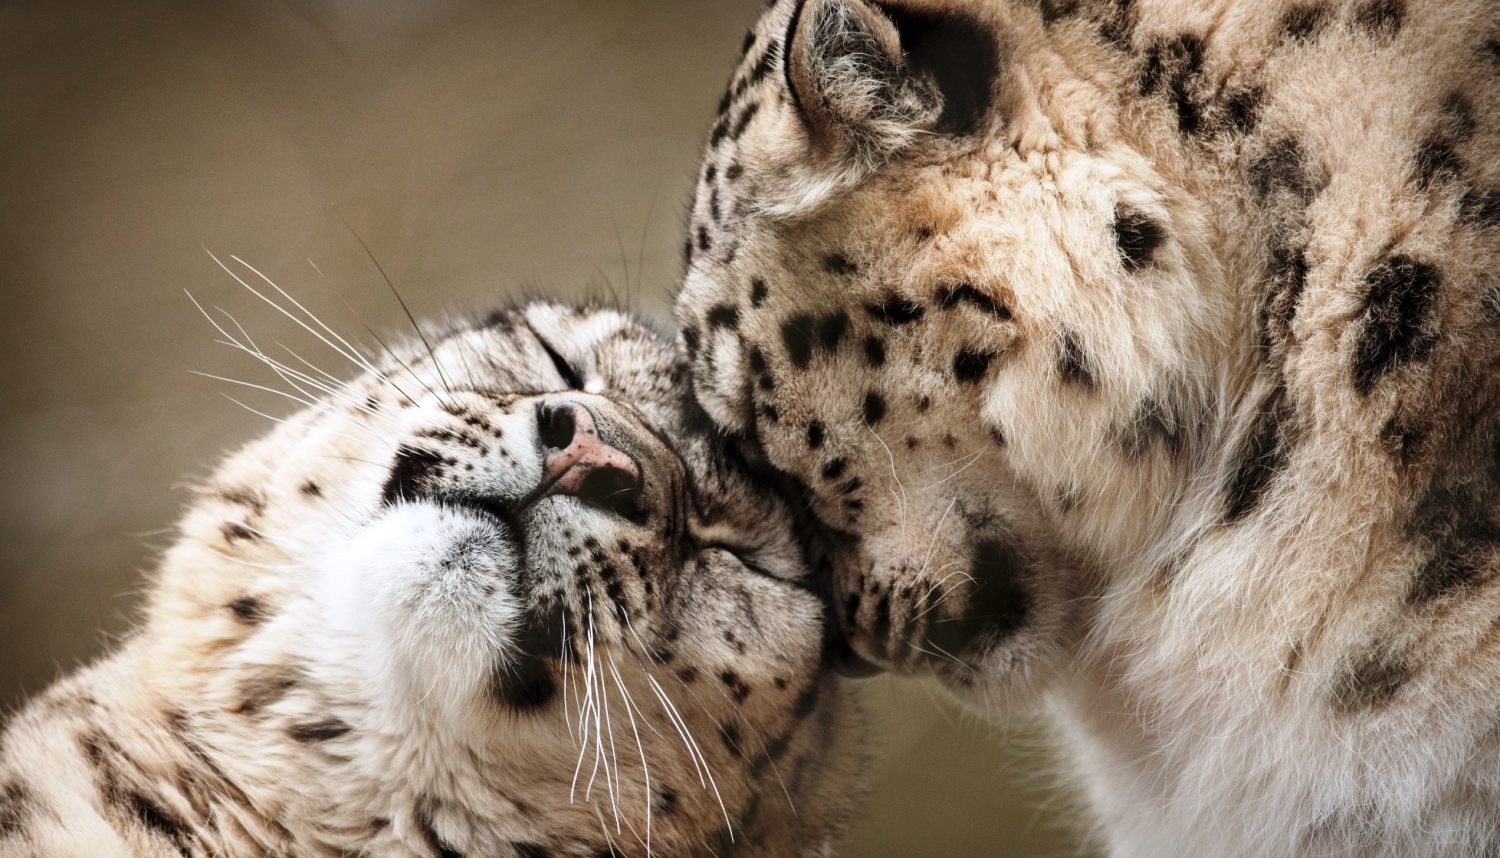 Snow Leopards at Marwell. Photography Competition - Credit Lawrie Brailey - Snow Leopard